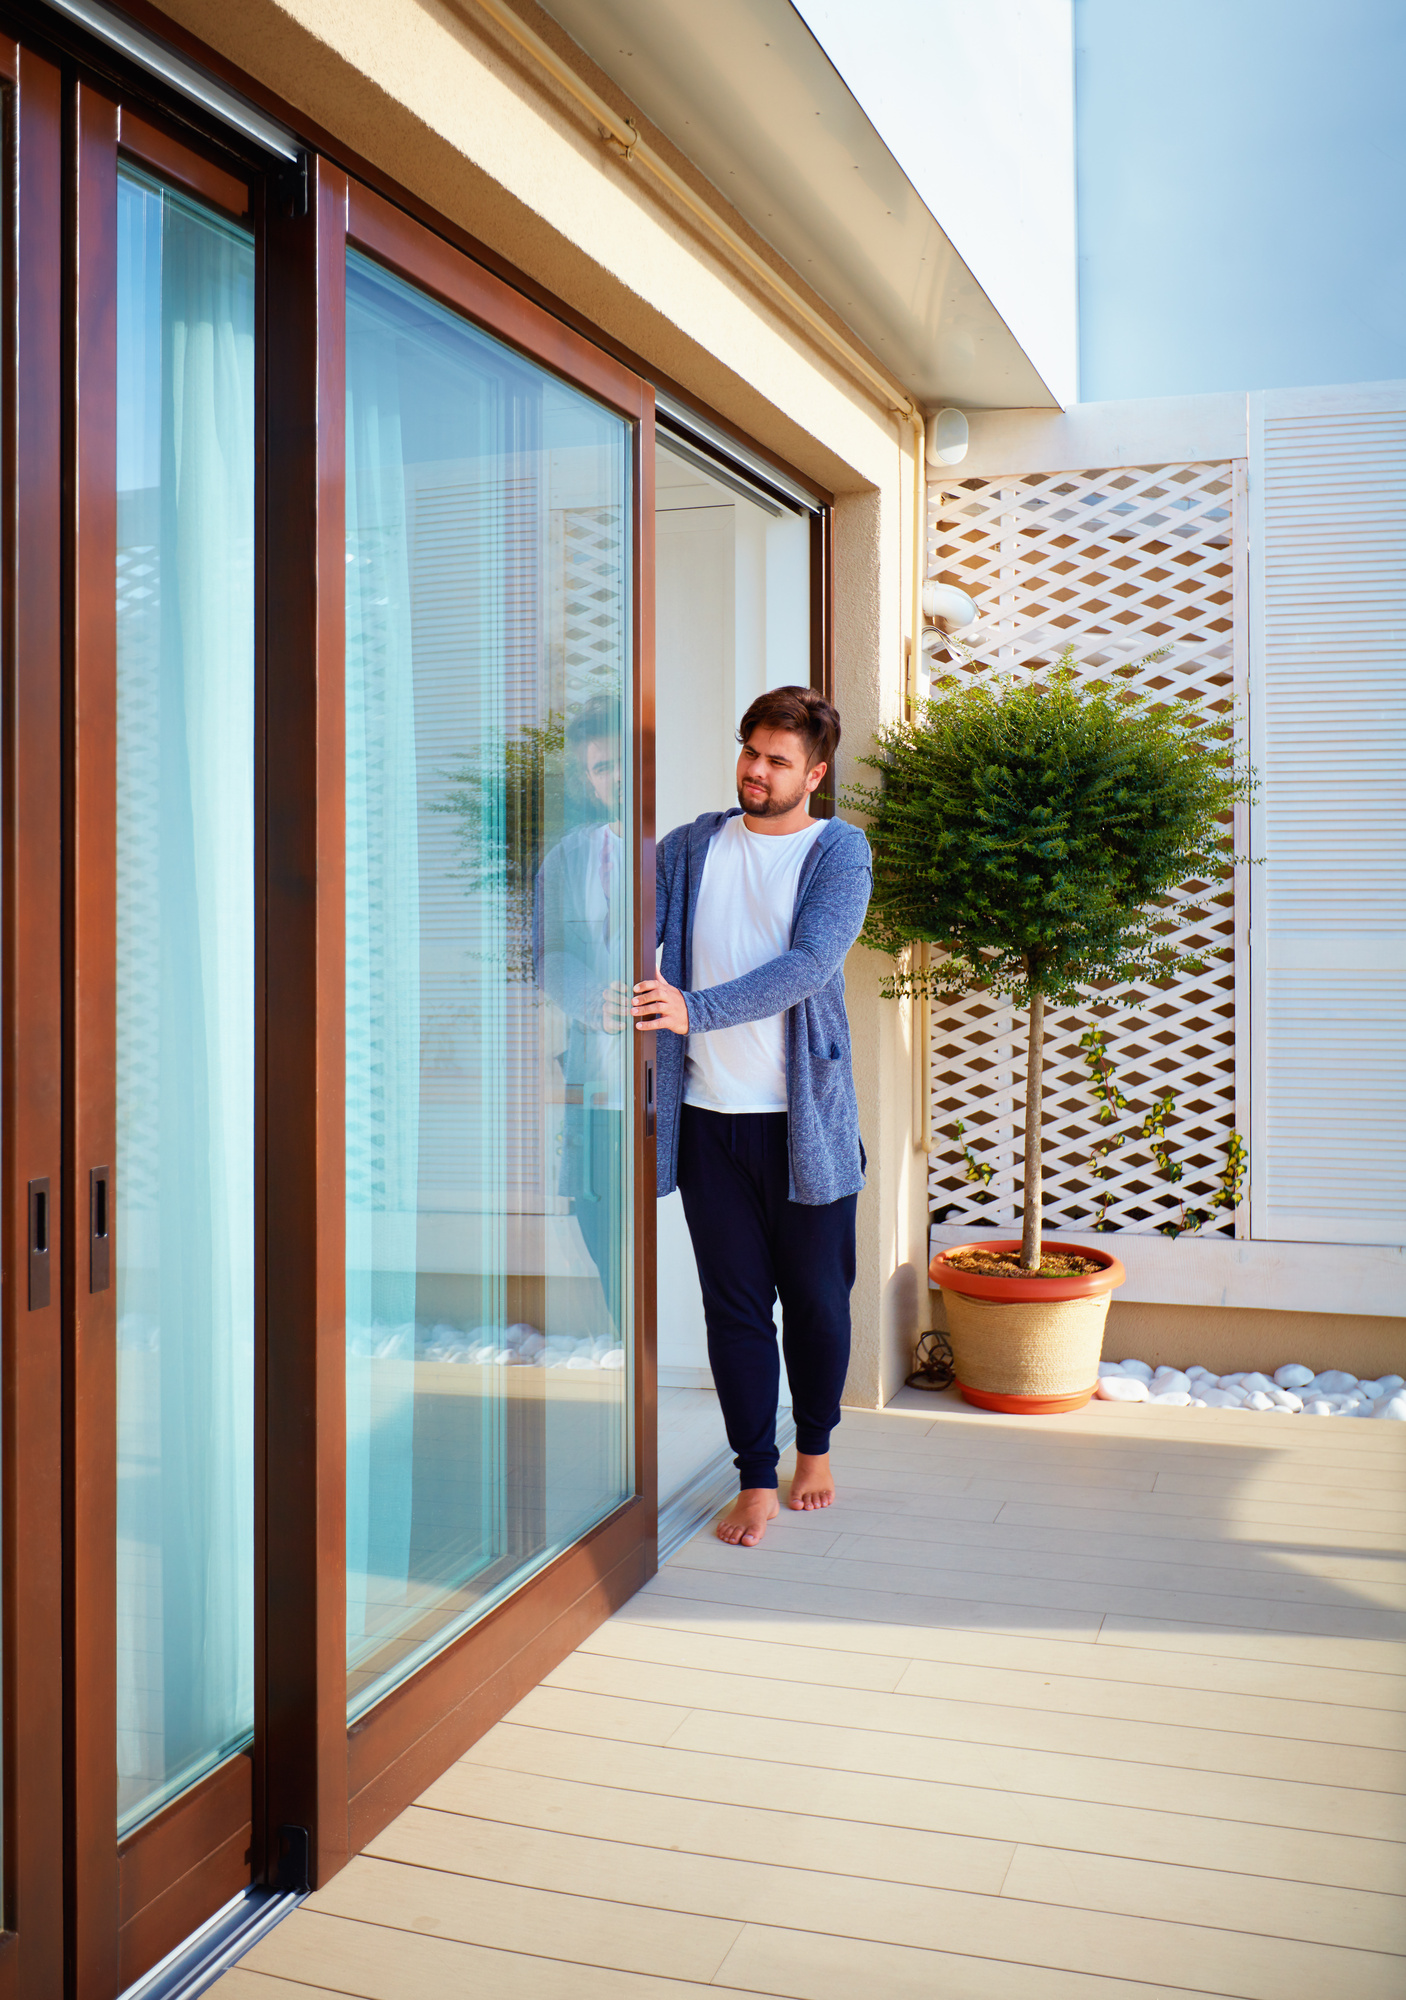 Having new patio doors installed in your home is exciting, and there are many popular styles. Here are some ideas to get you started.